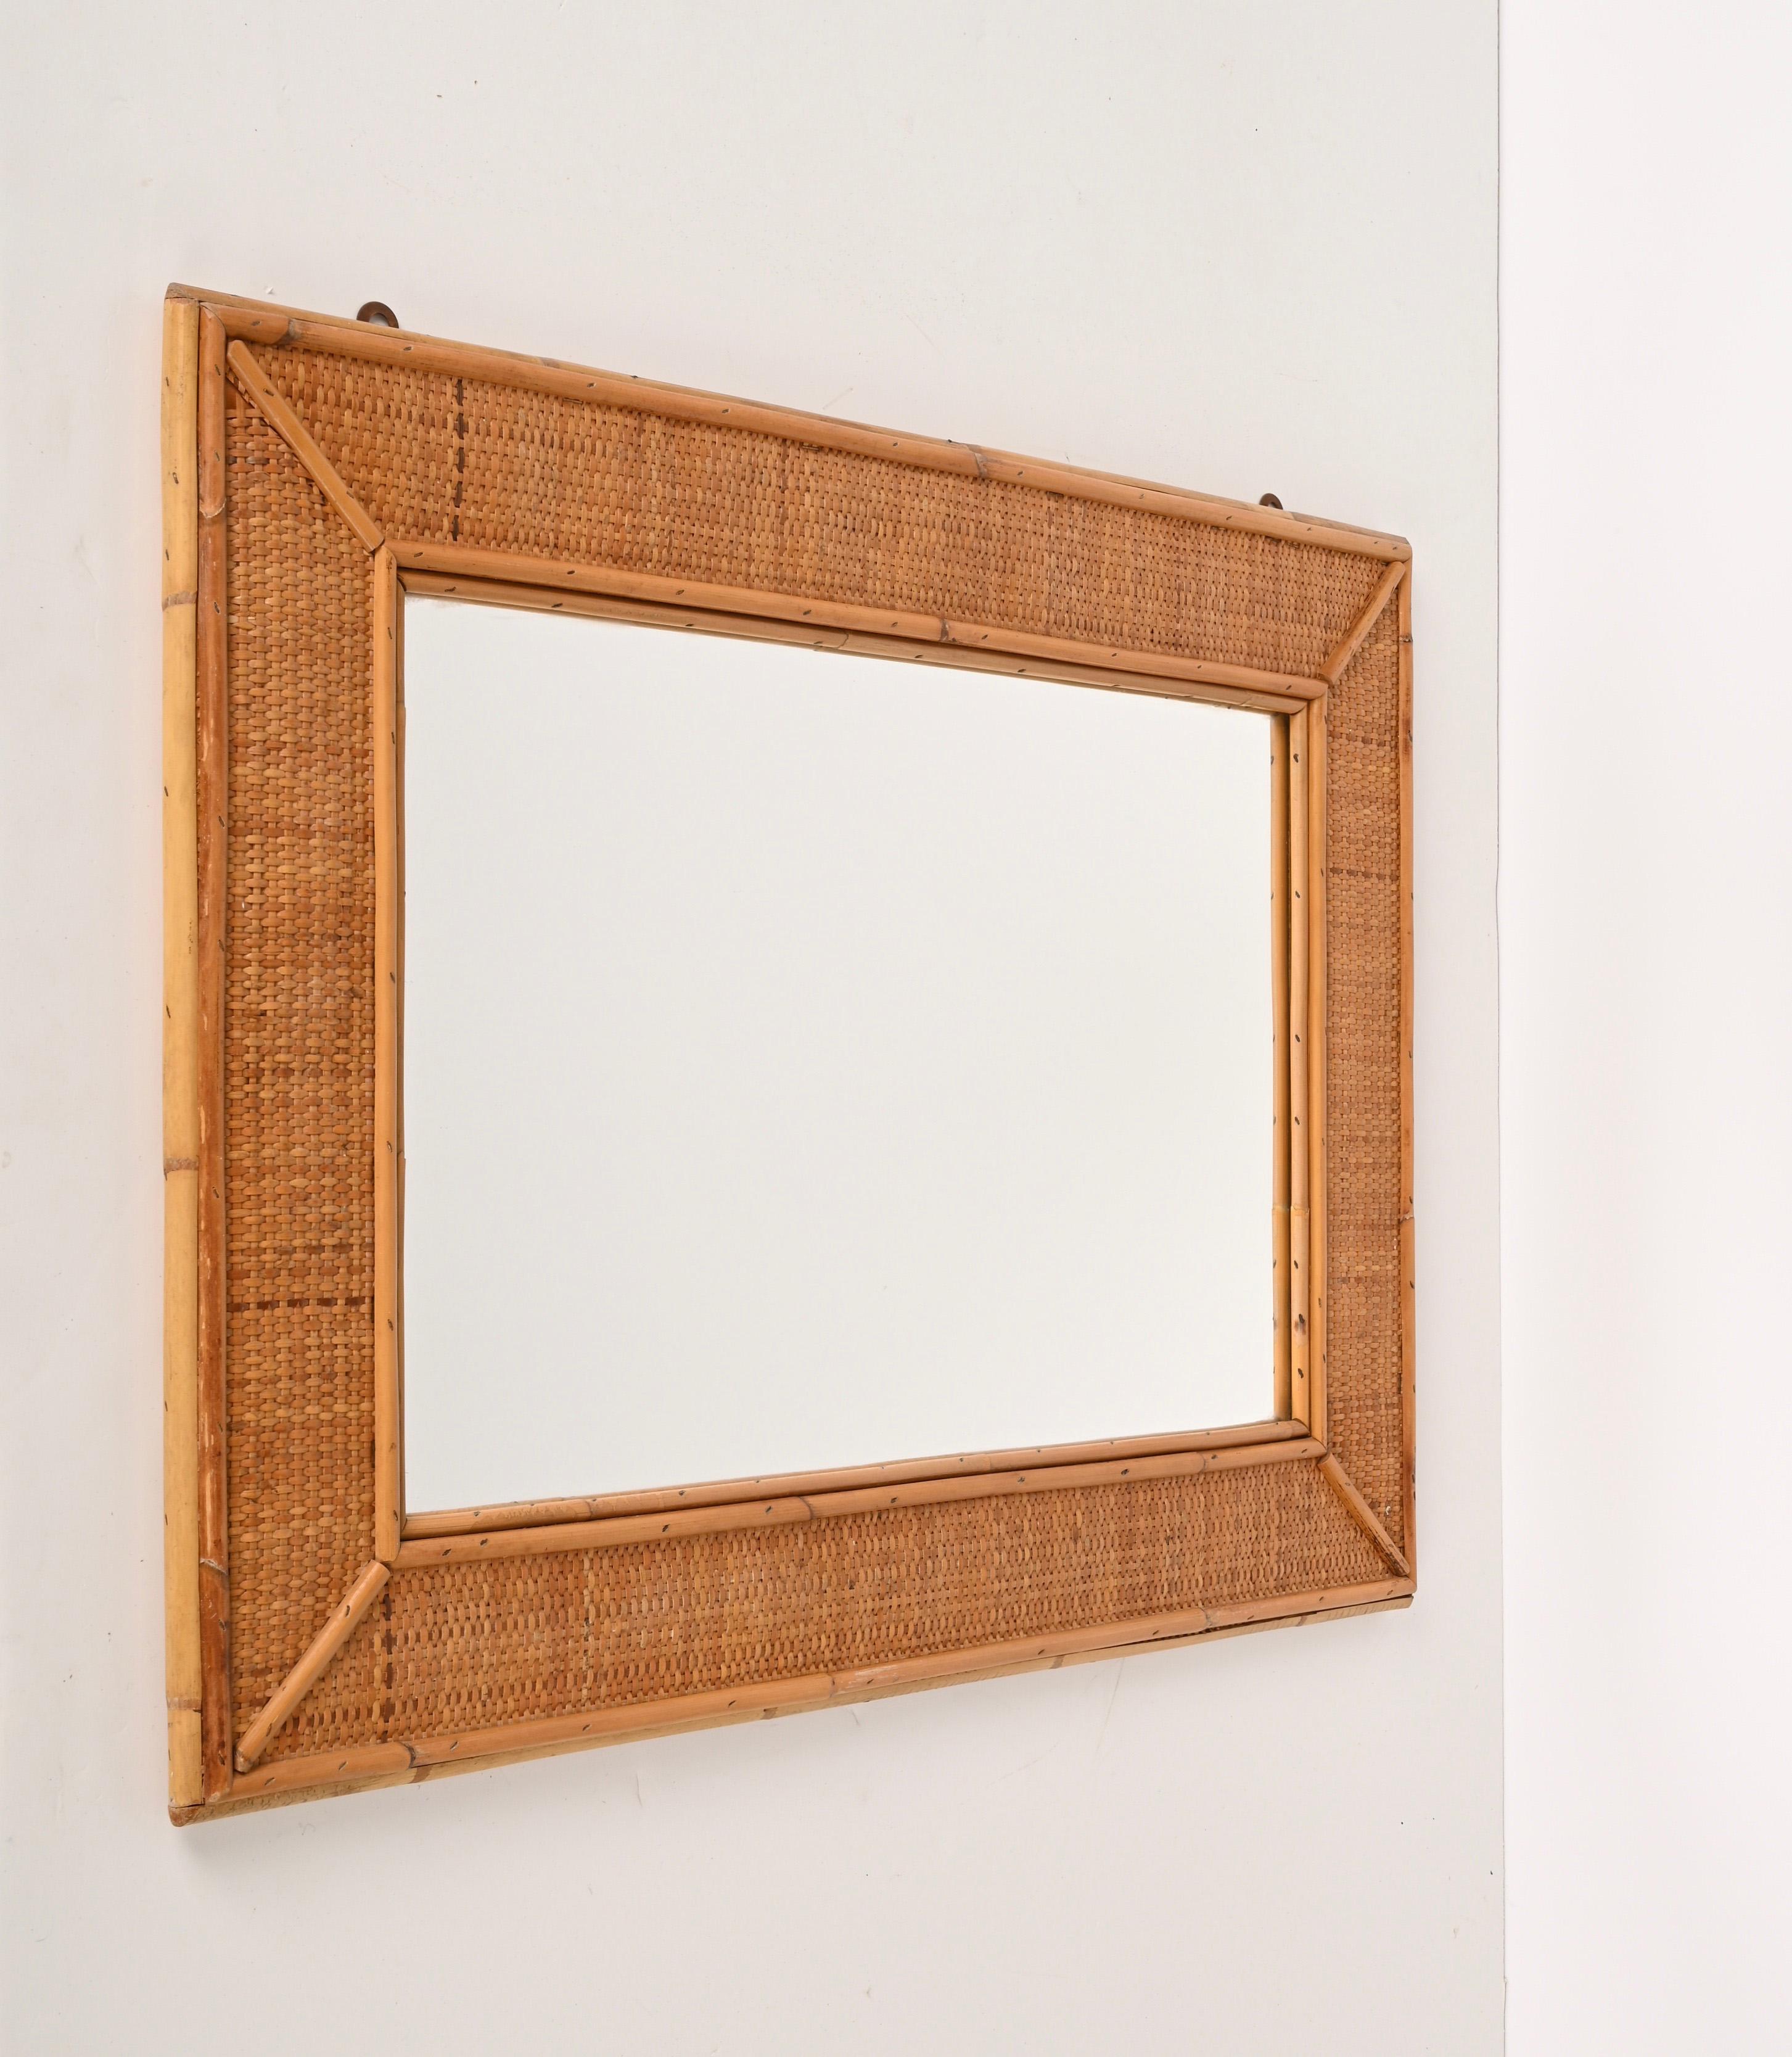 Midcentury Rectangular Italian Mirror with Bamboo and Woven Wicker Frame, 1970s For Sale 8